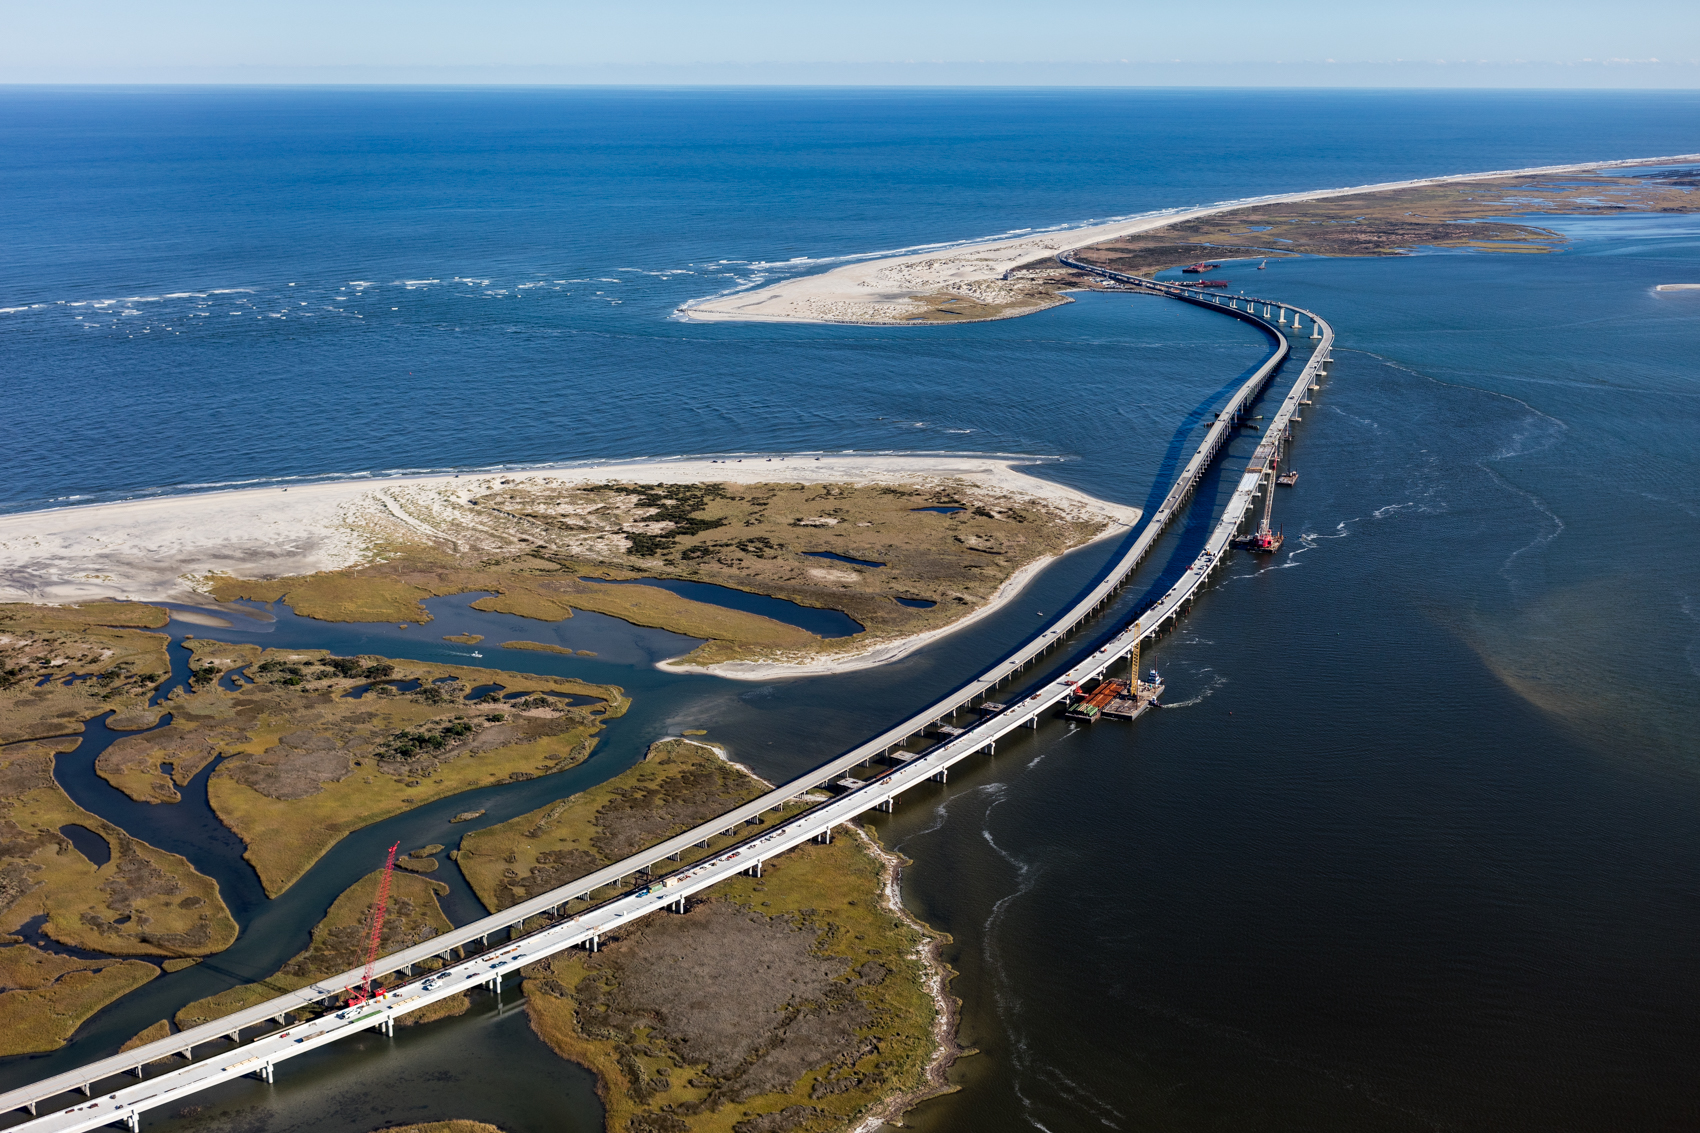 A bridge spans Oregon Inlet in Nags Head, North Carolina. The inlet moves an average of 66 feet per year, having moved over two miles south since 1846.